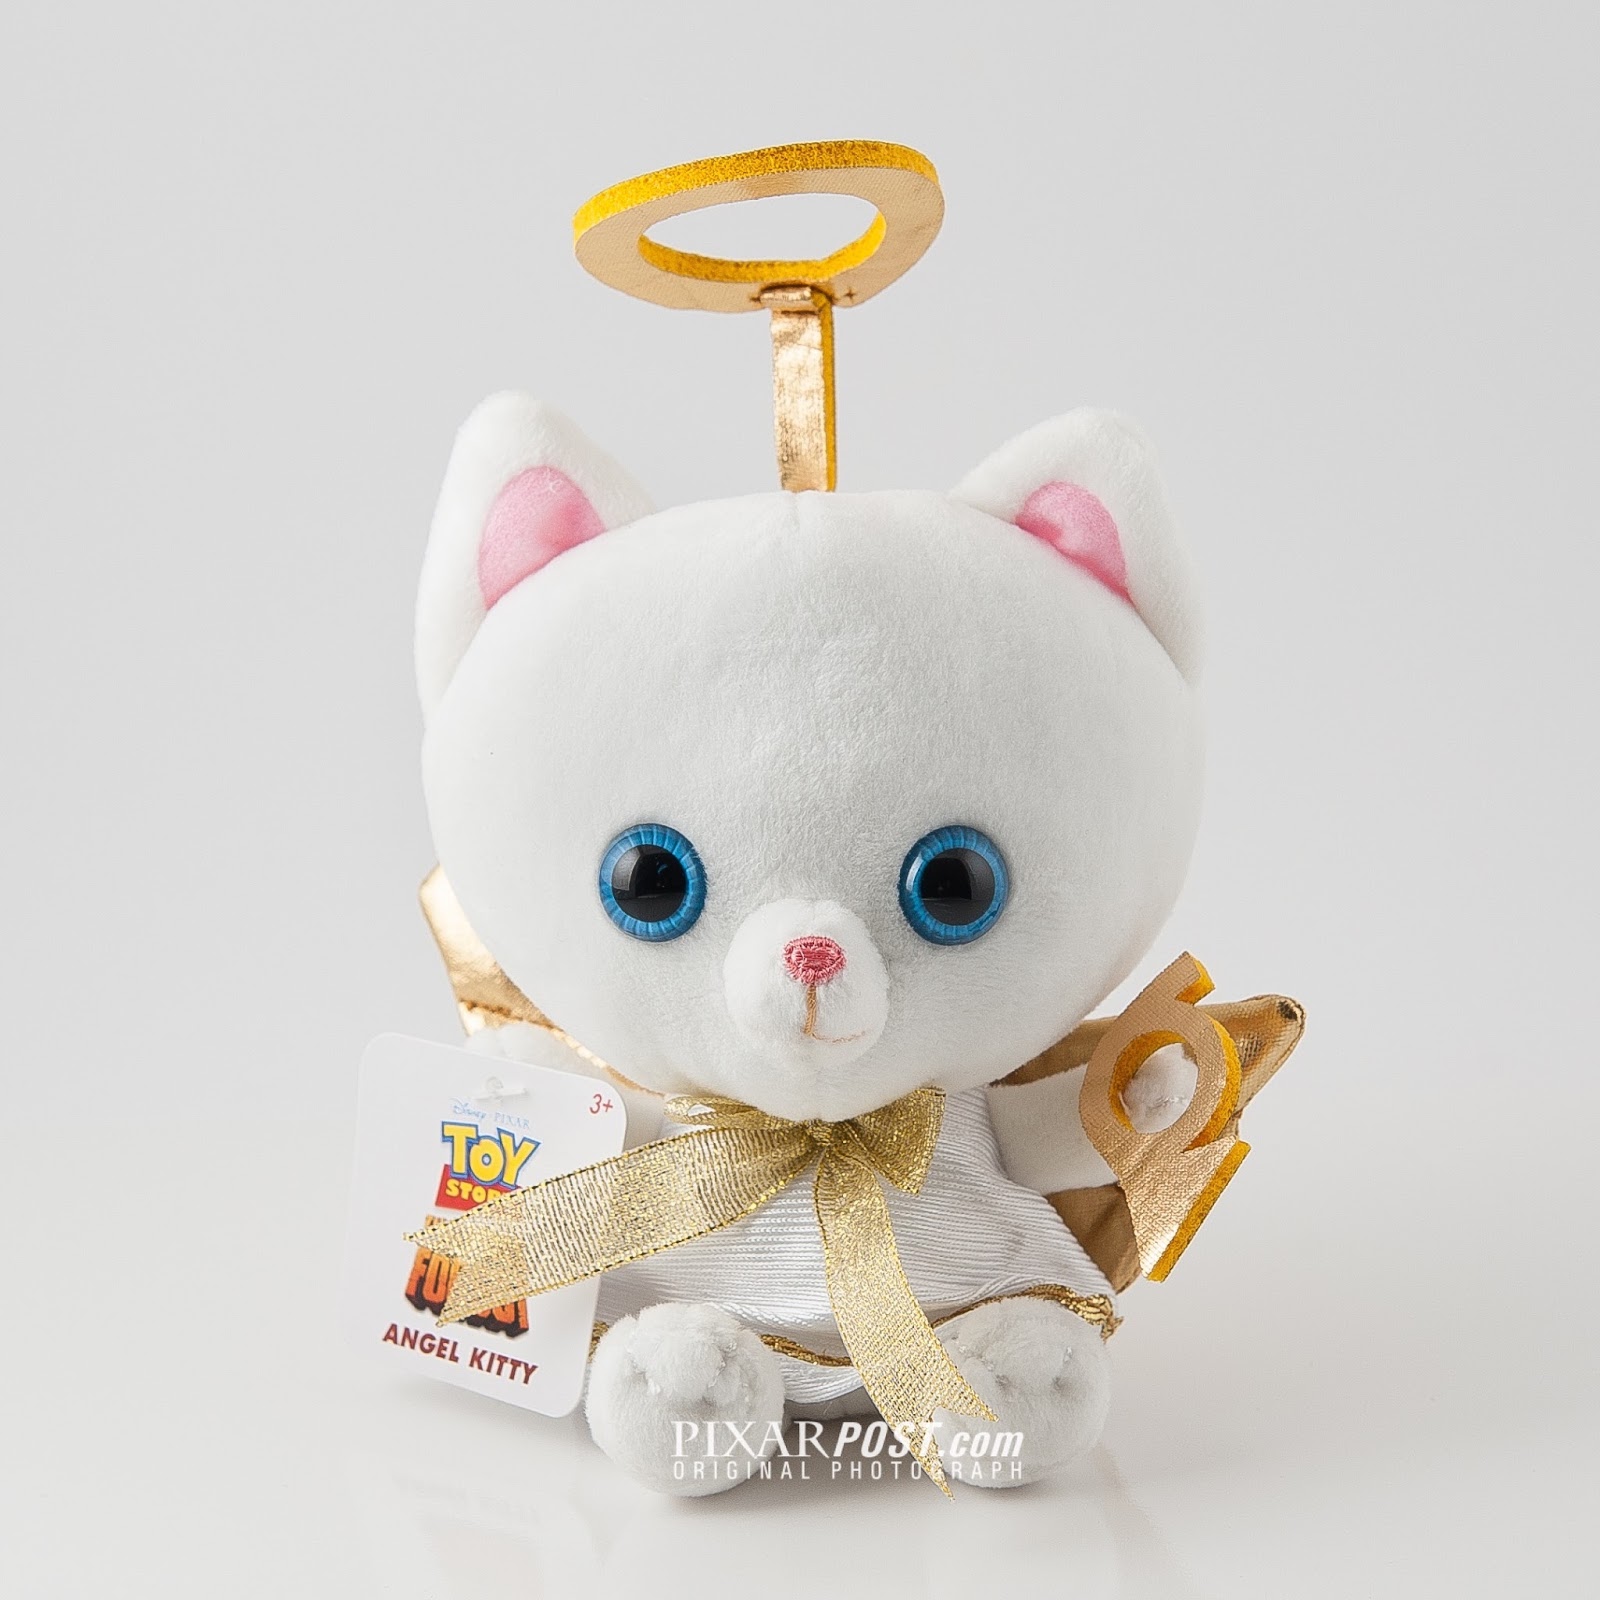 Angel Kitty and Mr. Jones 'Toy Story' Special Plush Toy Reviews ...